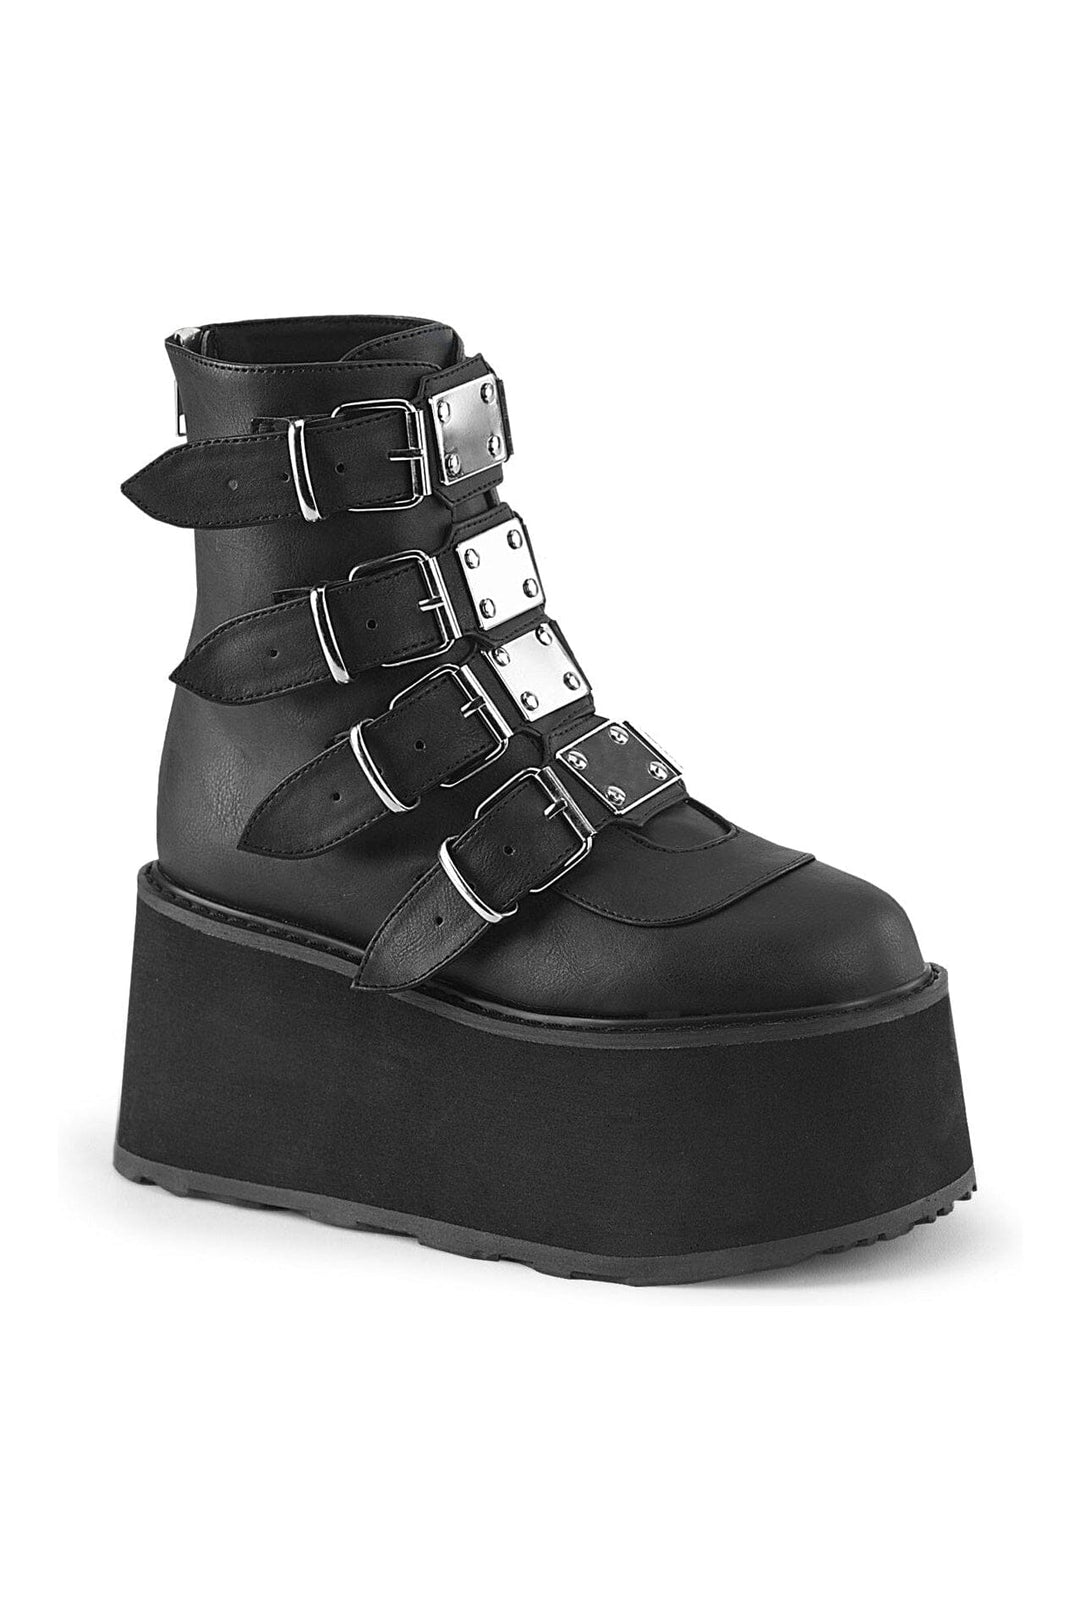 DAMNED-105 Black Vegan Leather Ankle Boot-Ankle Boots-Demonia-Black-10-Vegan Leather-SEXYSHOES.COM